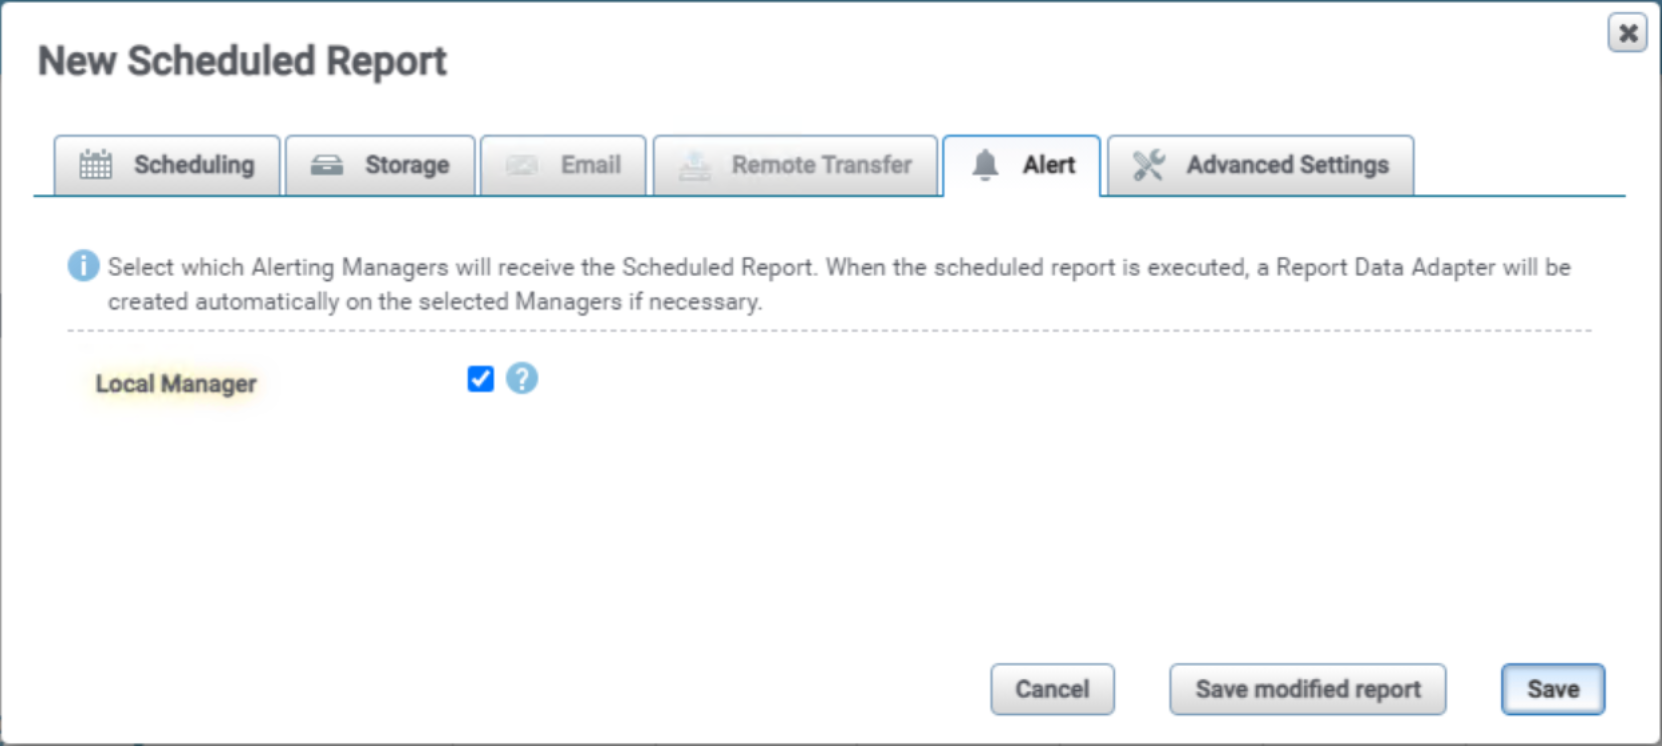 A screenshot of scheduling a report in the Dell SRM user interface.